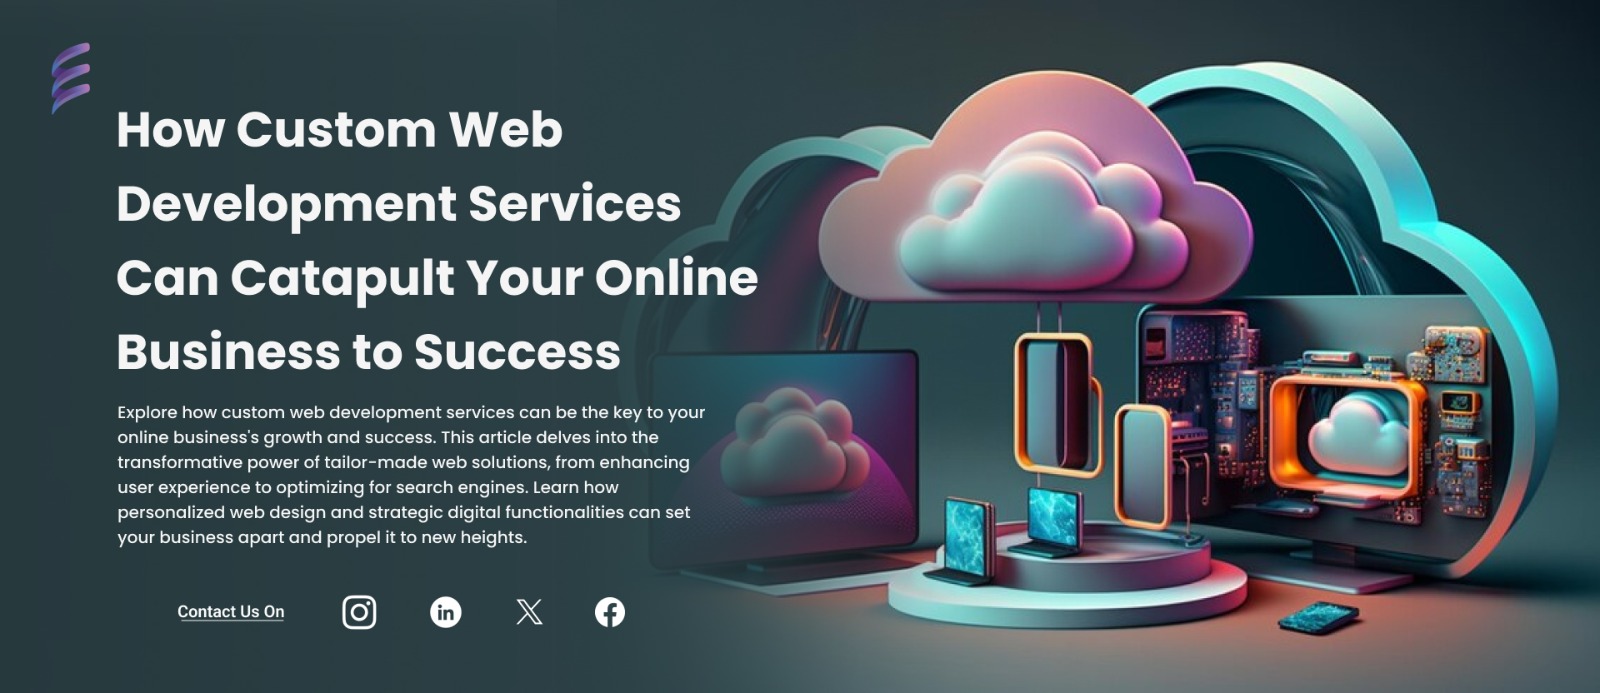 How Custom Web Development Services Can Catapult Your Online Business to Success